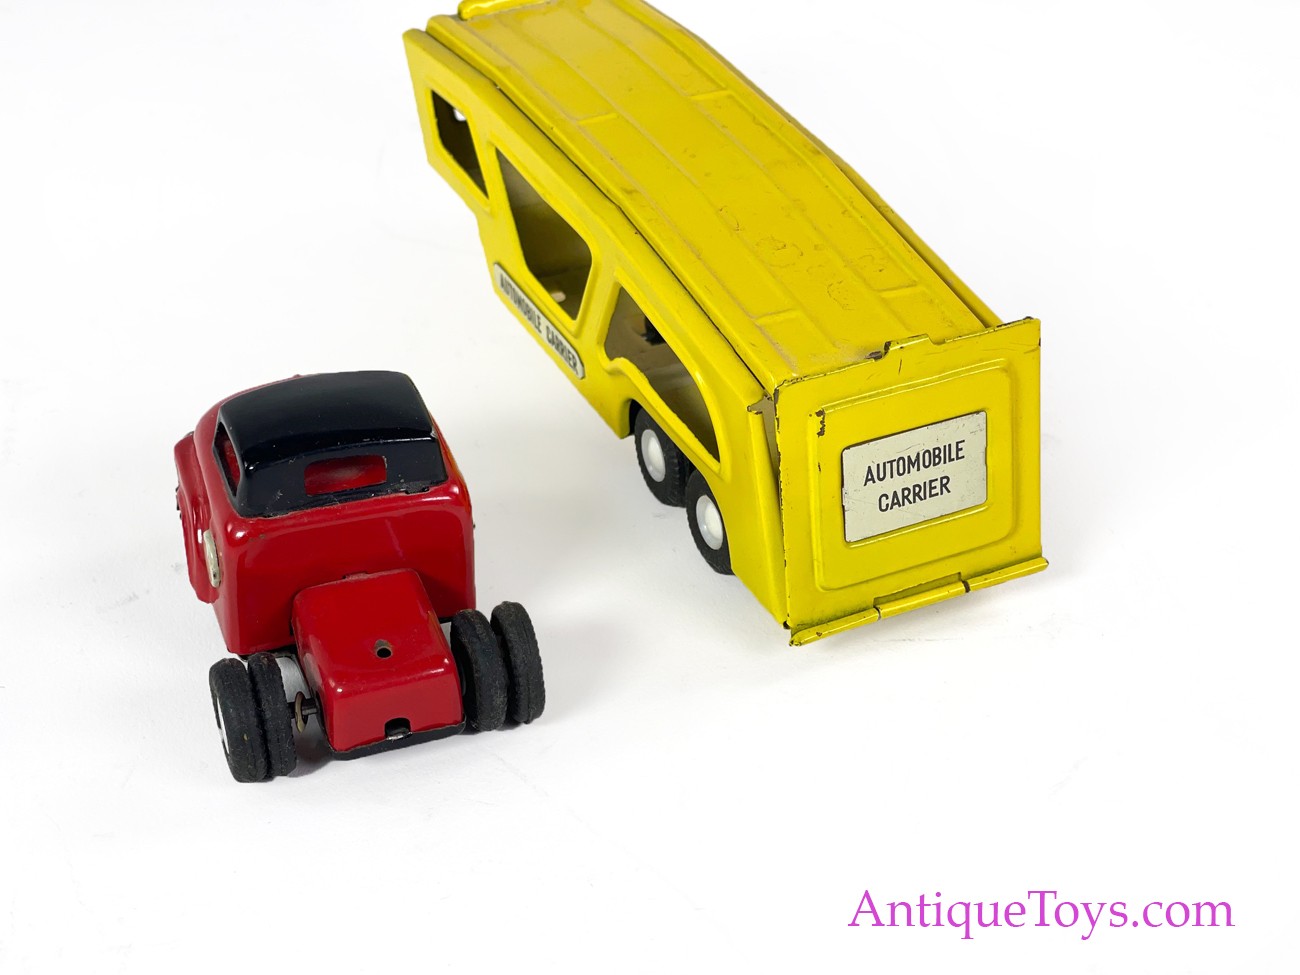 SSS Tin Auto Carrier Japanese Toy for Sale *SOLD* - AntiqueToys